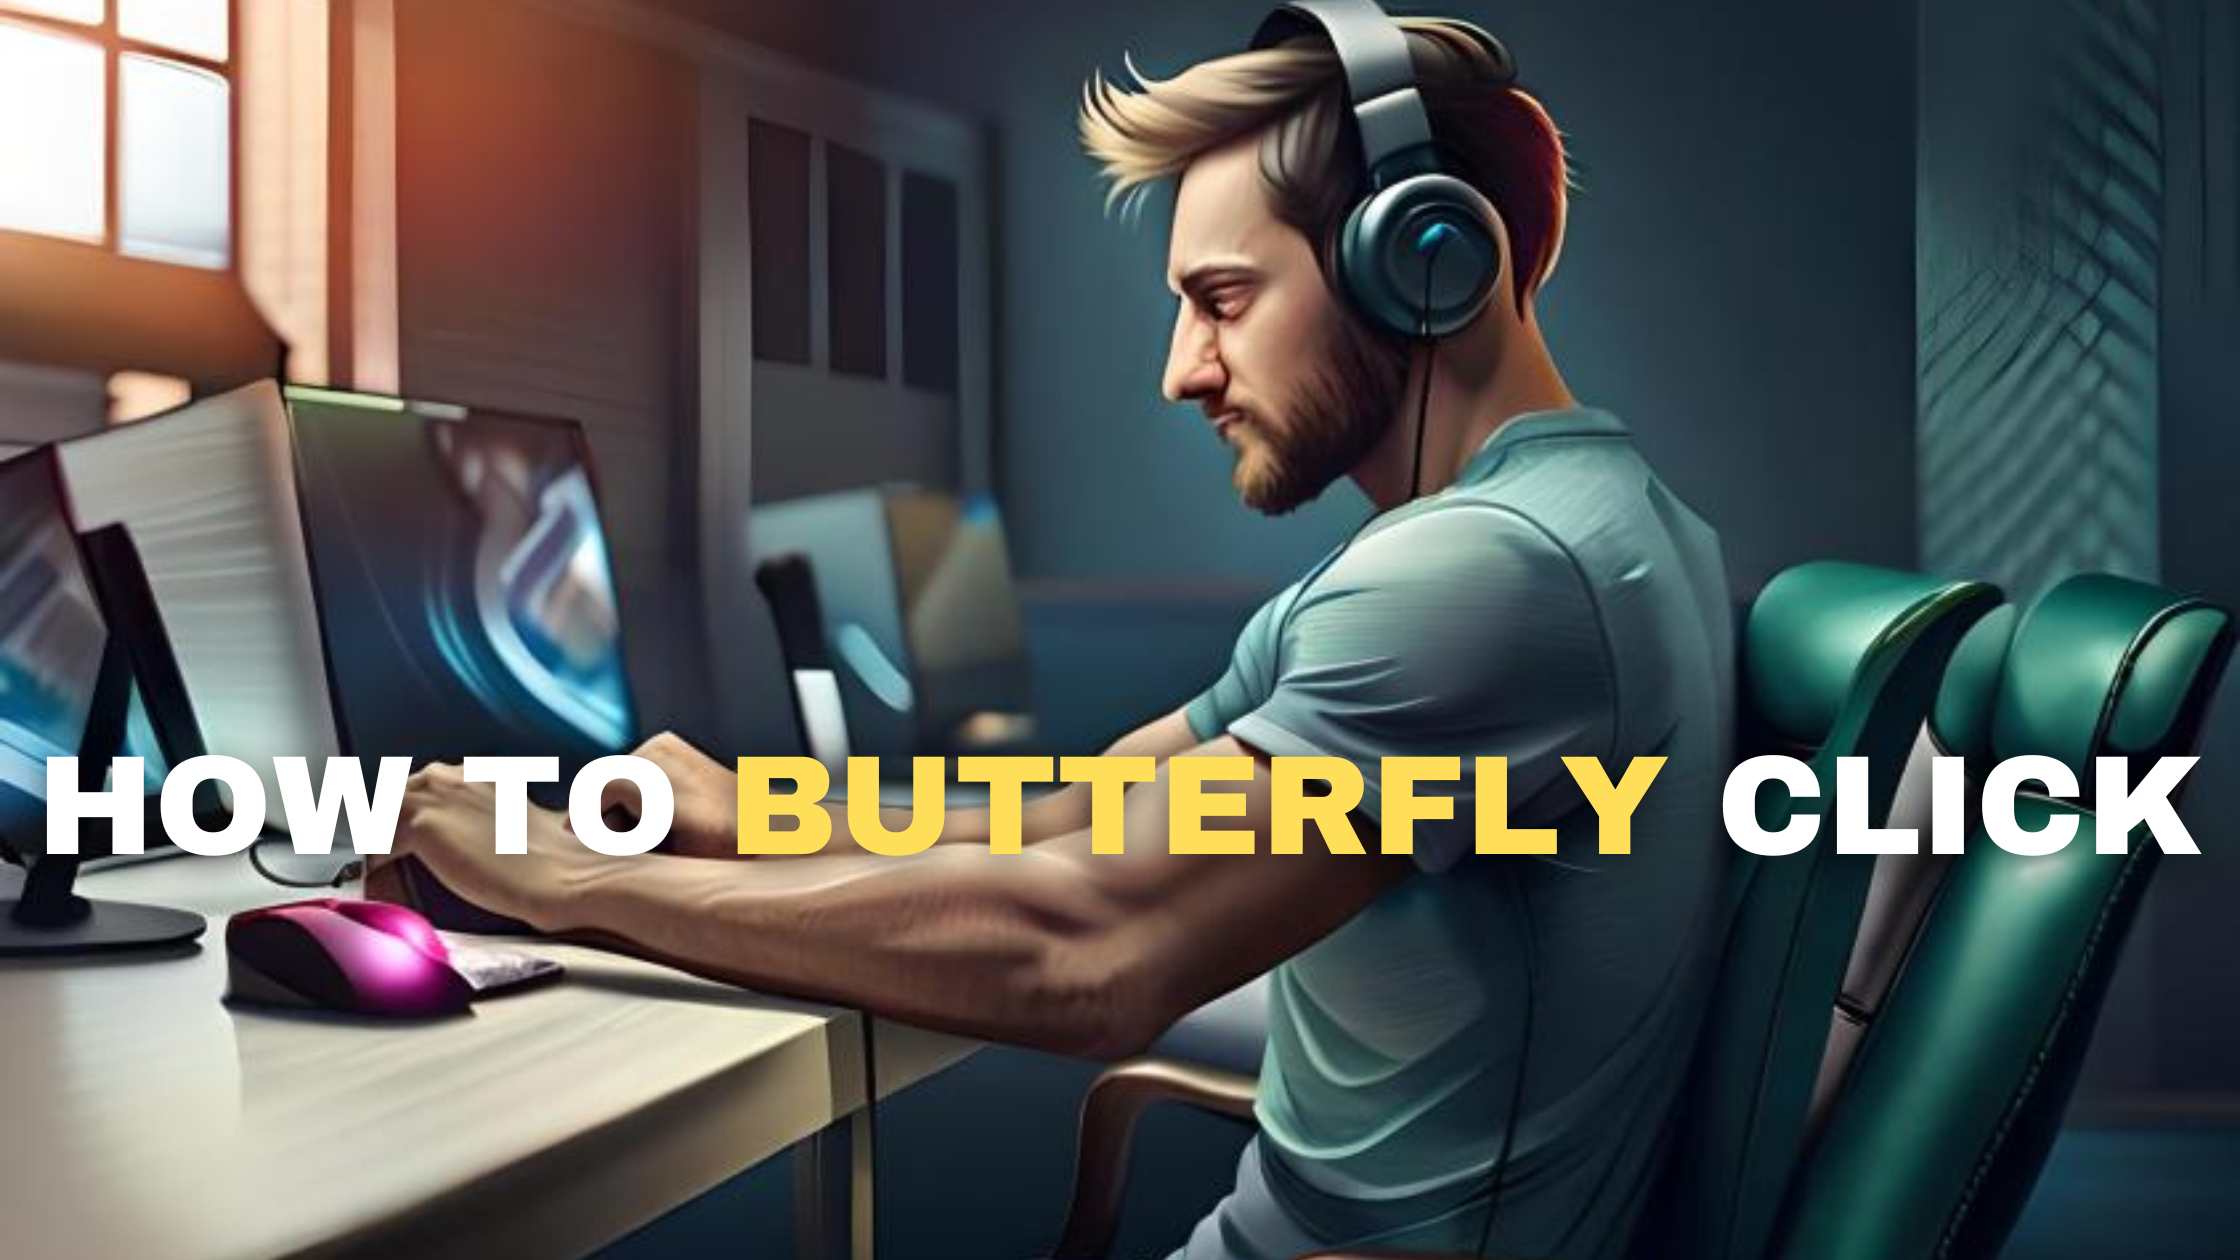 How To Butterfly Click: Pro Tips and Tricks for Gamers